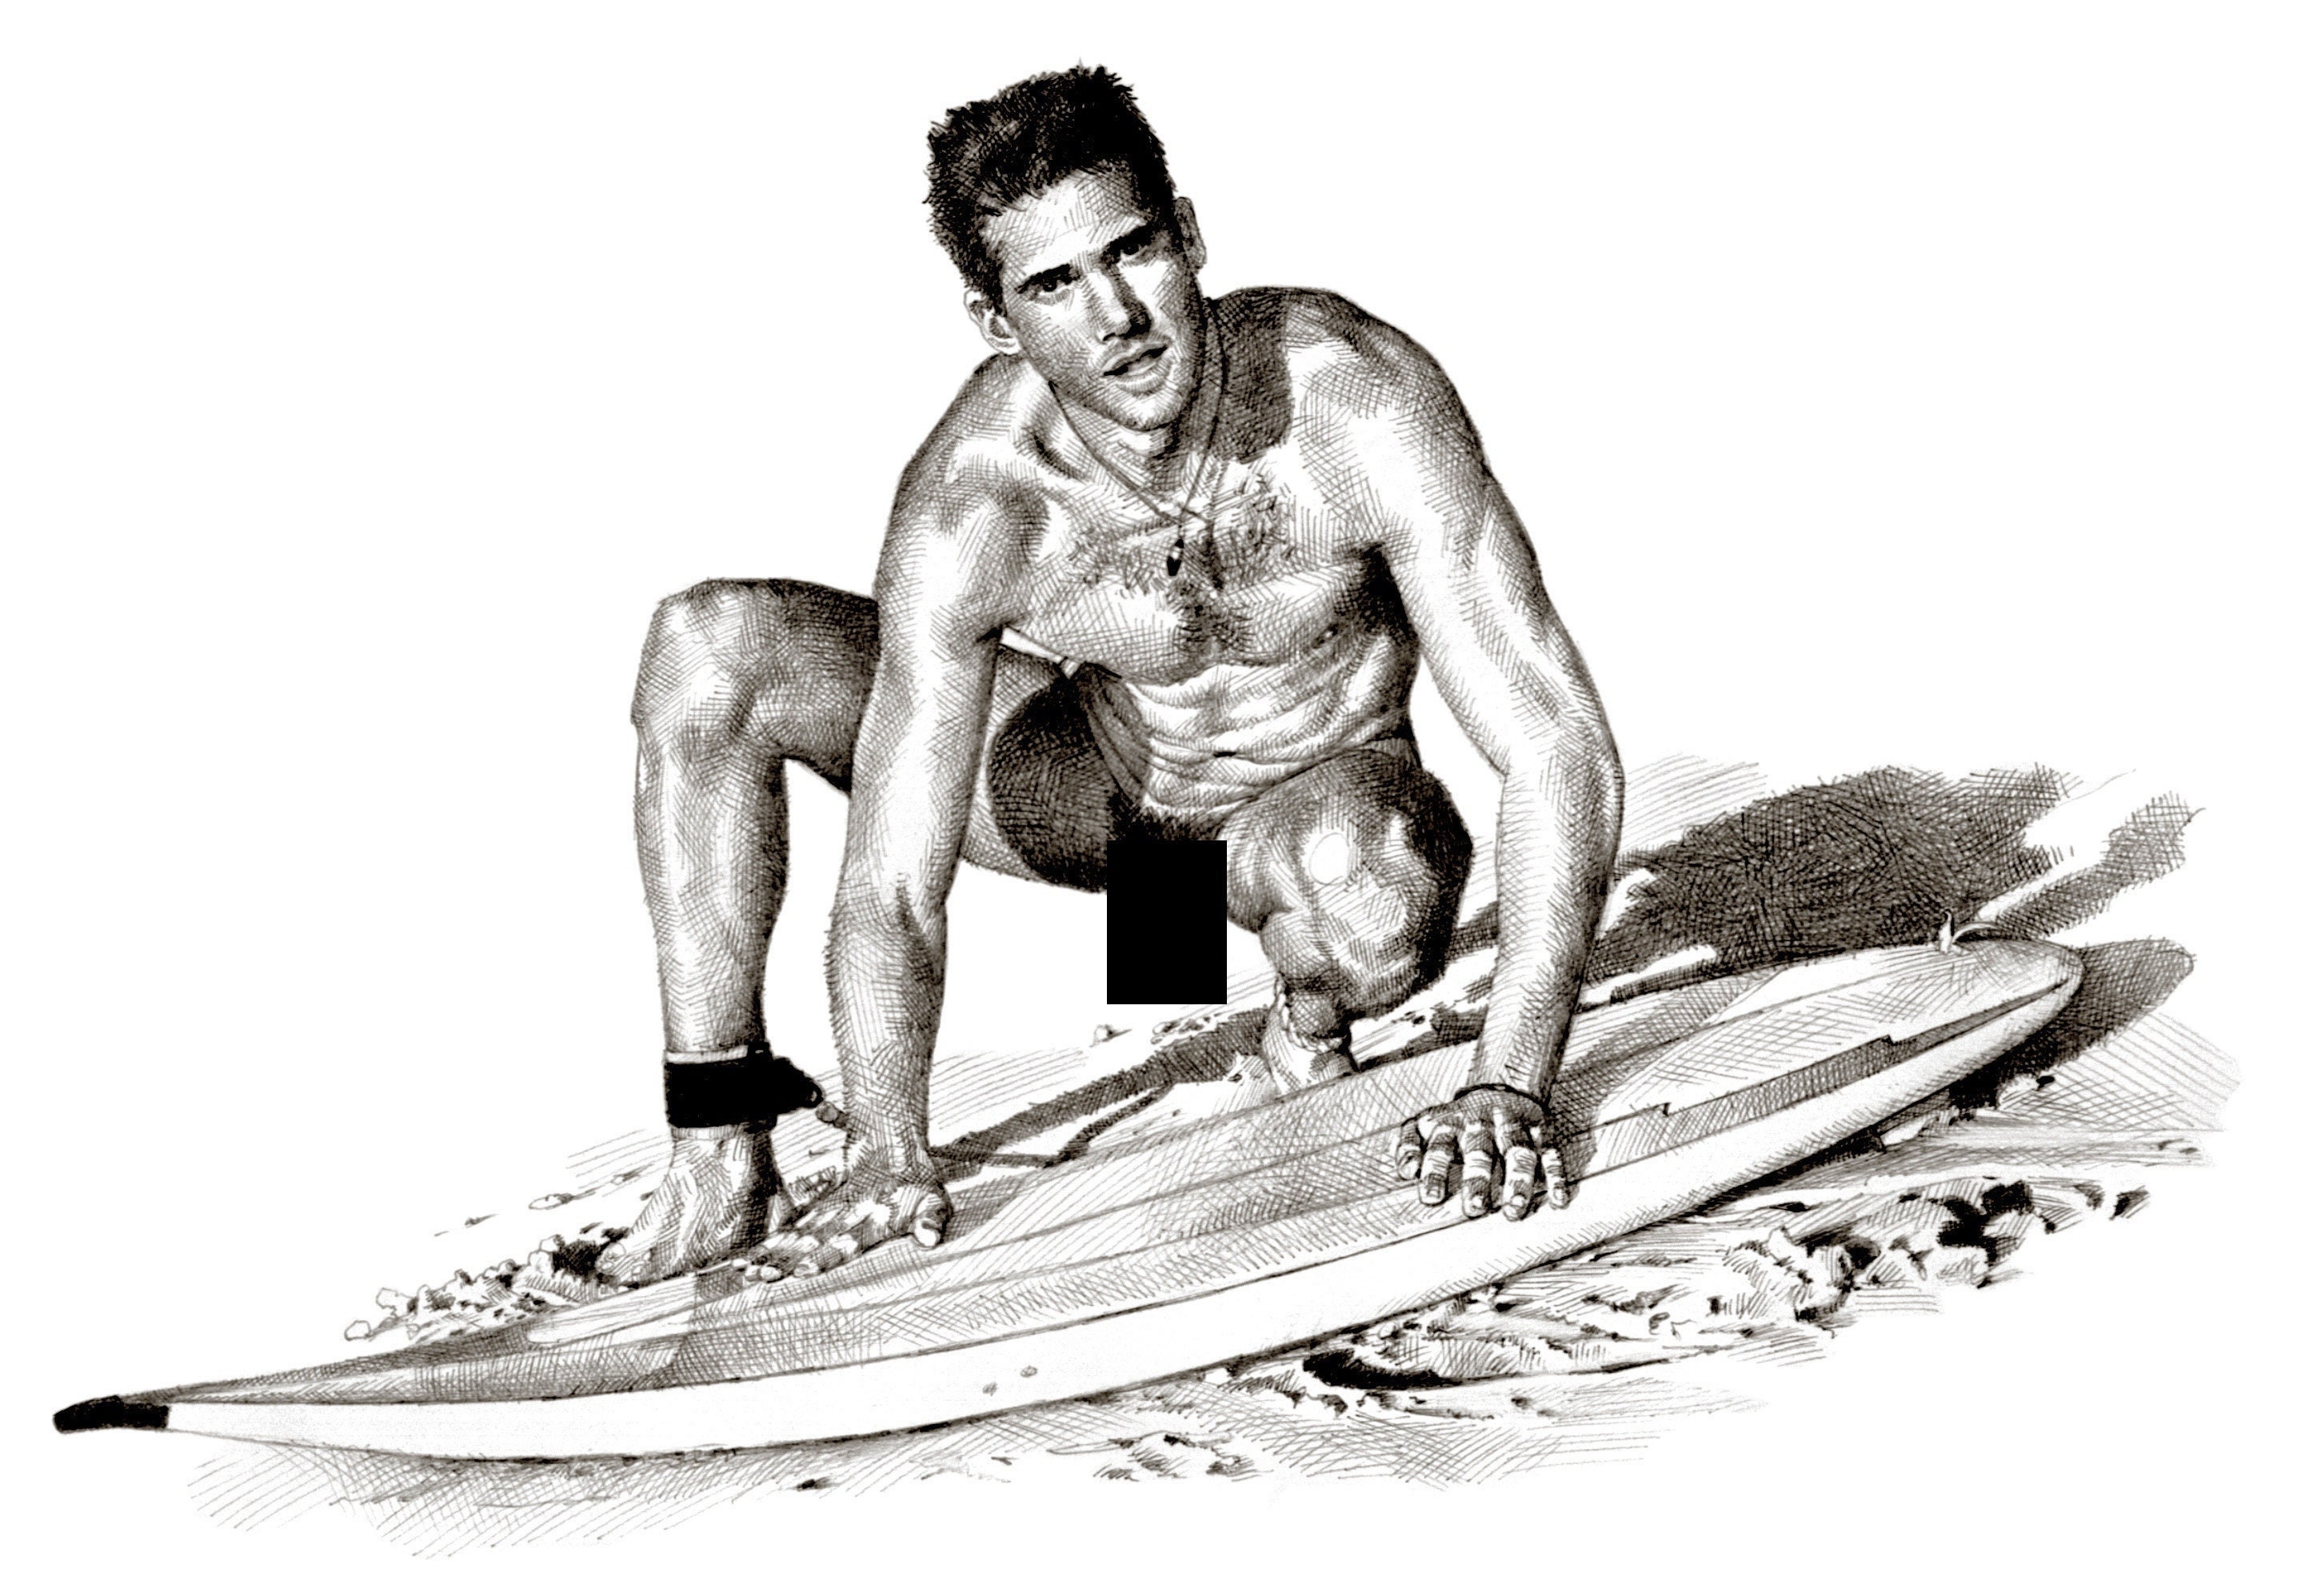 Waxing His Stick Male Nude Surfer in Hawaii Gay Art Male picture